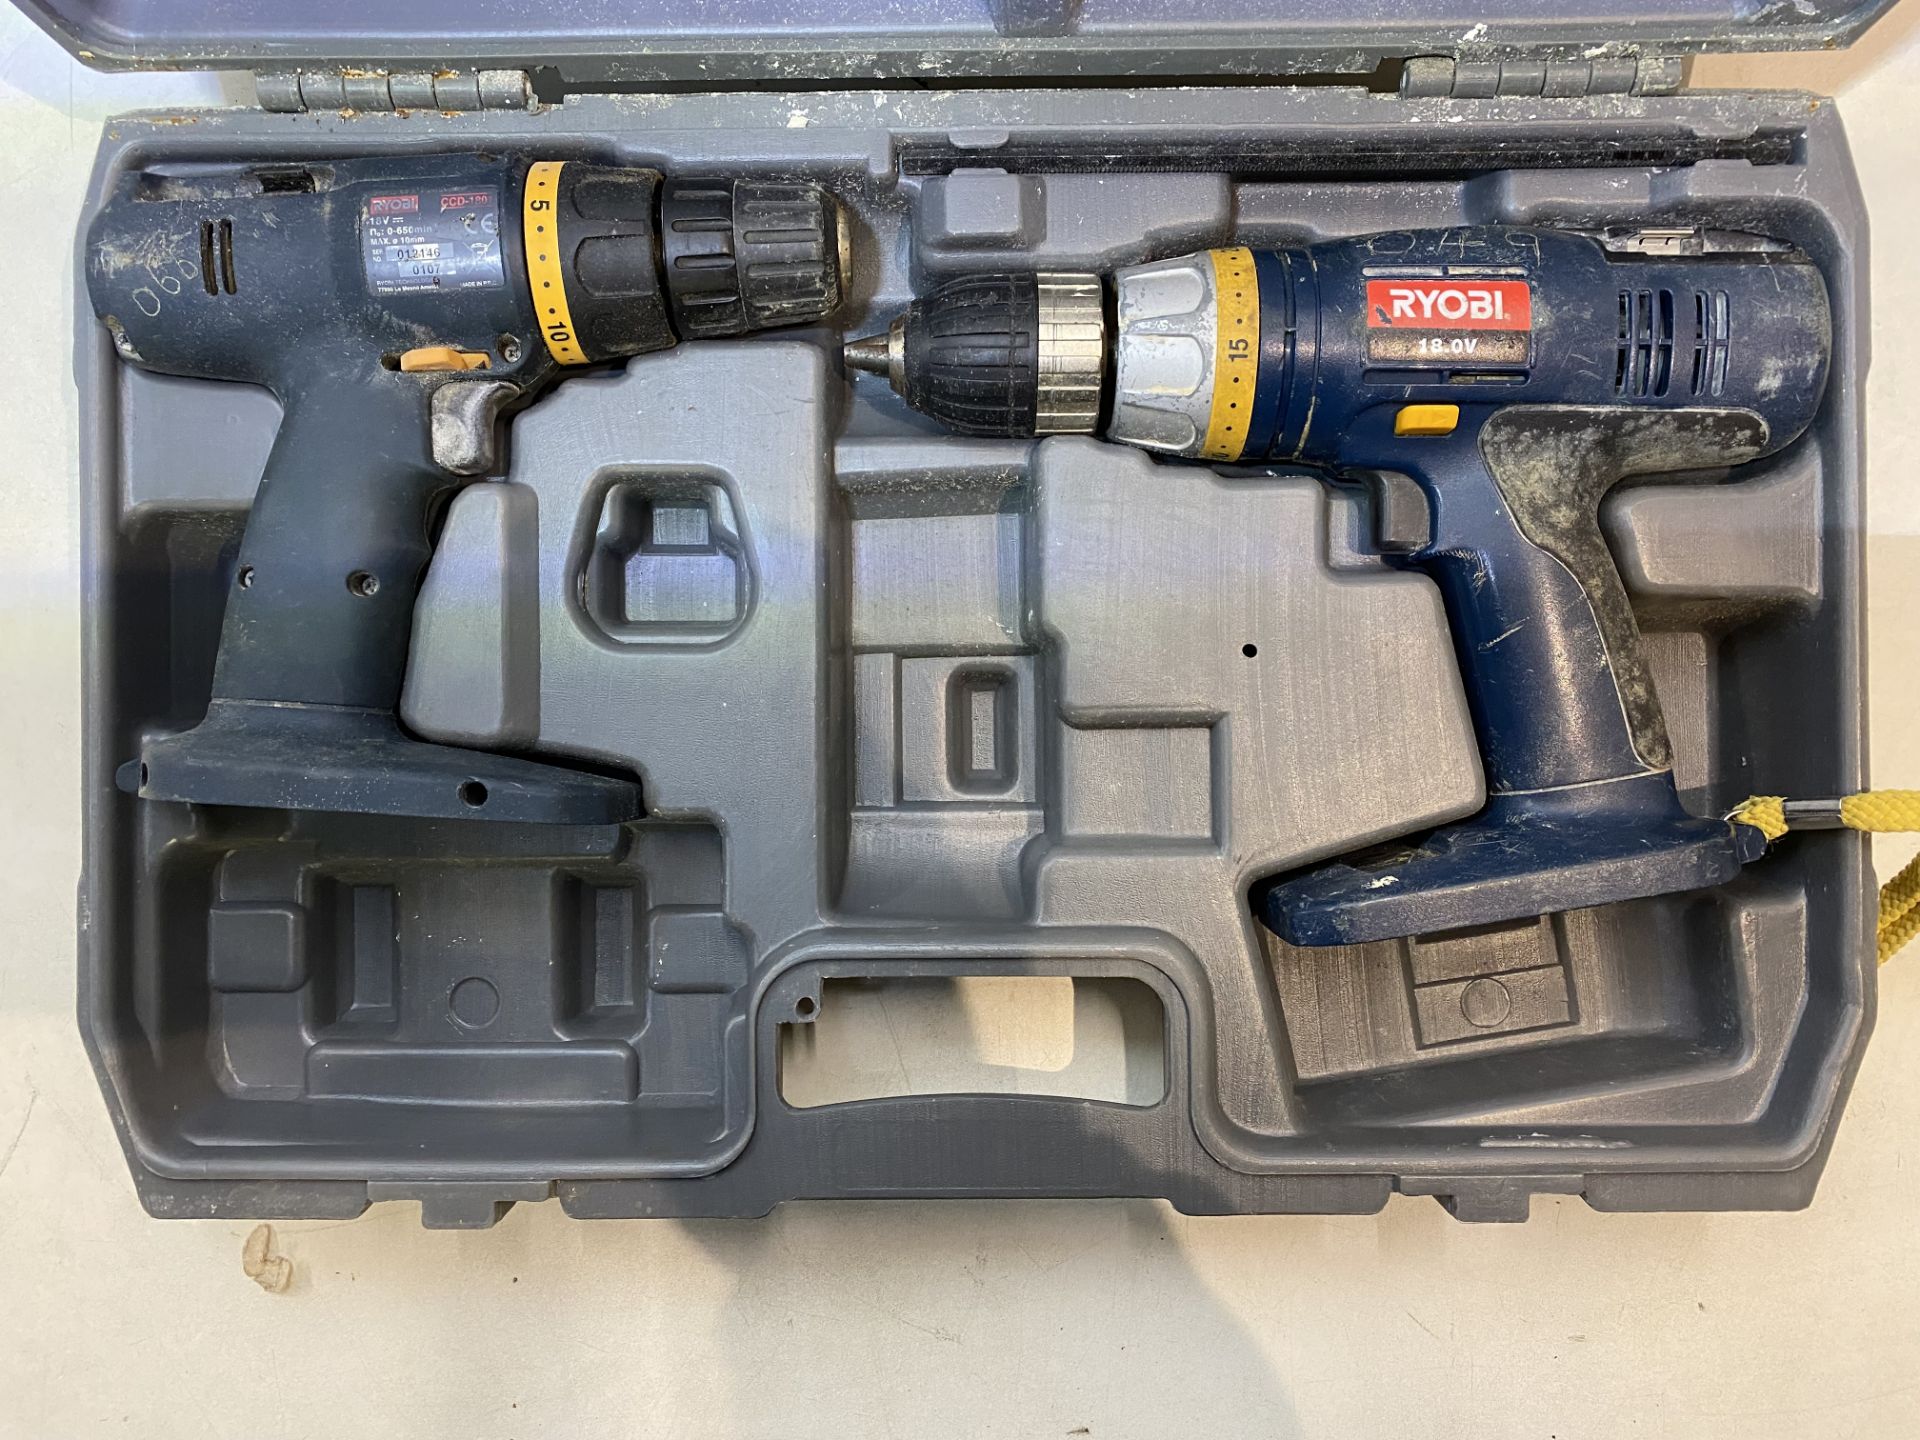 Ryobi CDI-1801CD Cordless Twin Pack Impact driver + Drill Driver 18v * Missing Parts * - See Picture - Image 2 of 4